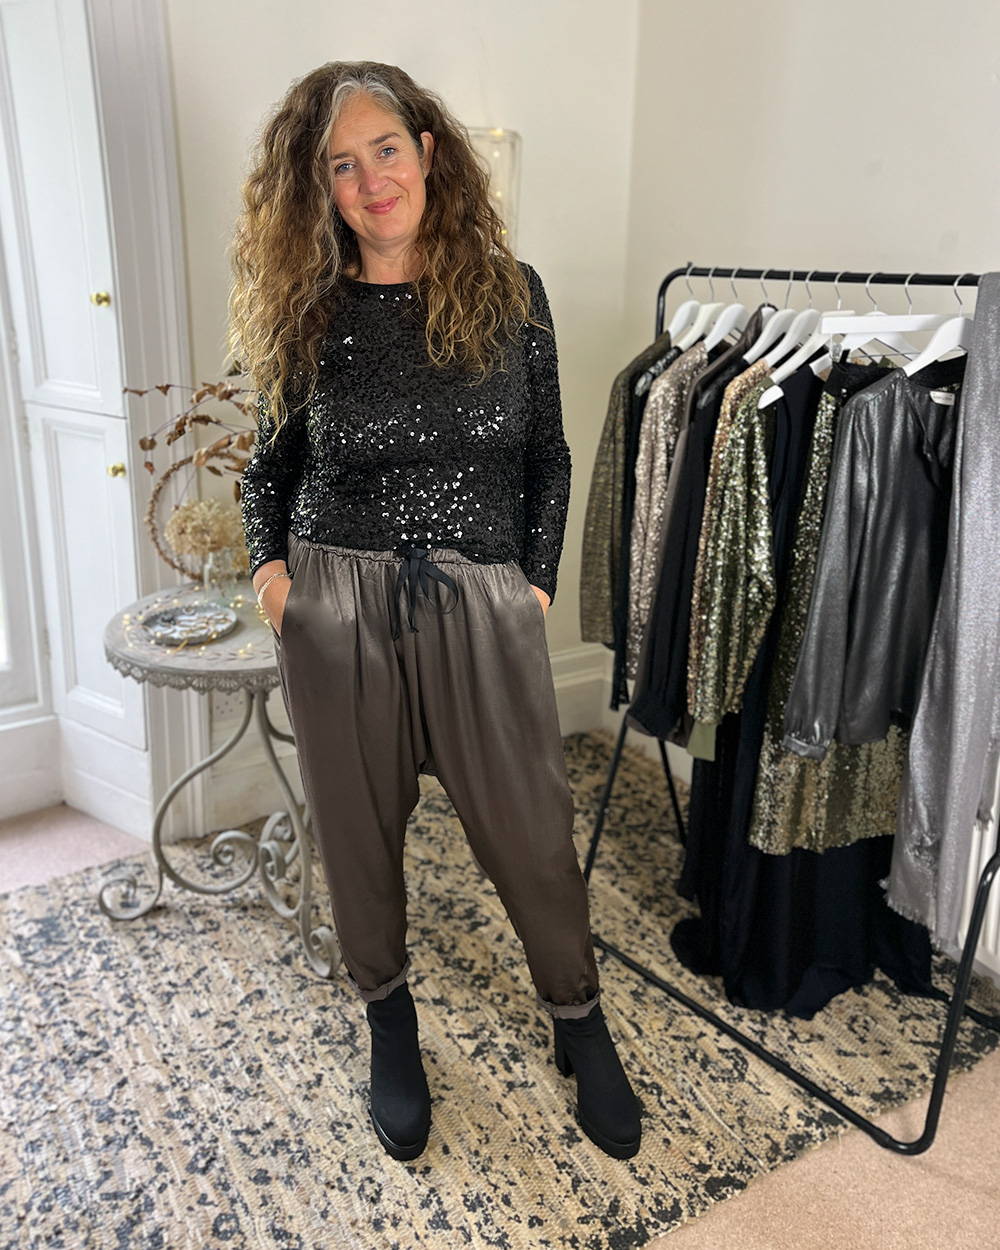 Emma wearing a black sequinned top and grey satin trousers